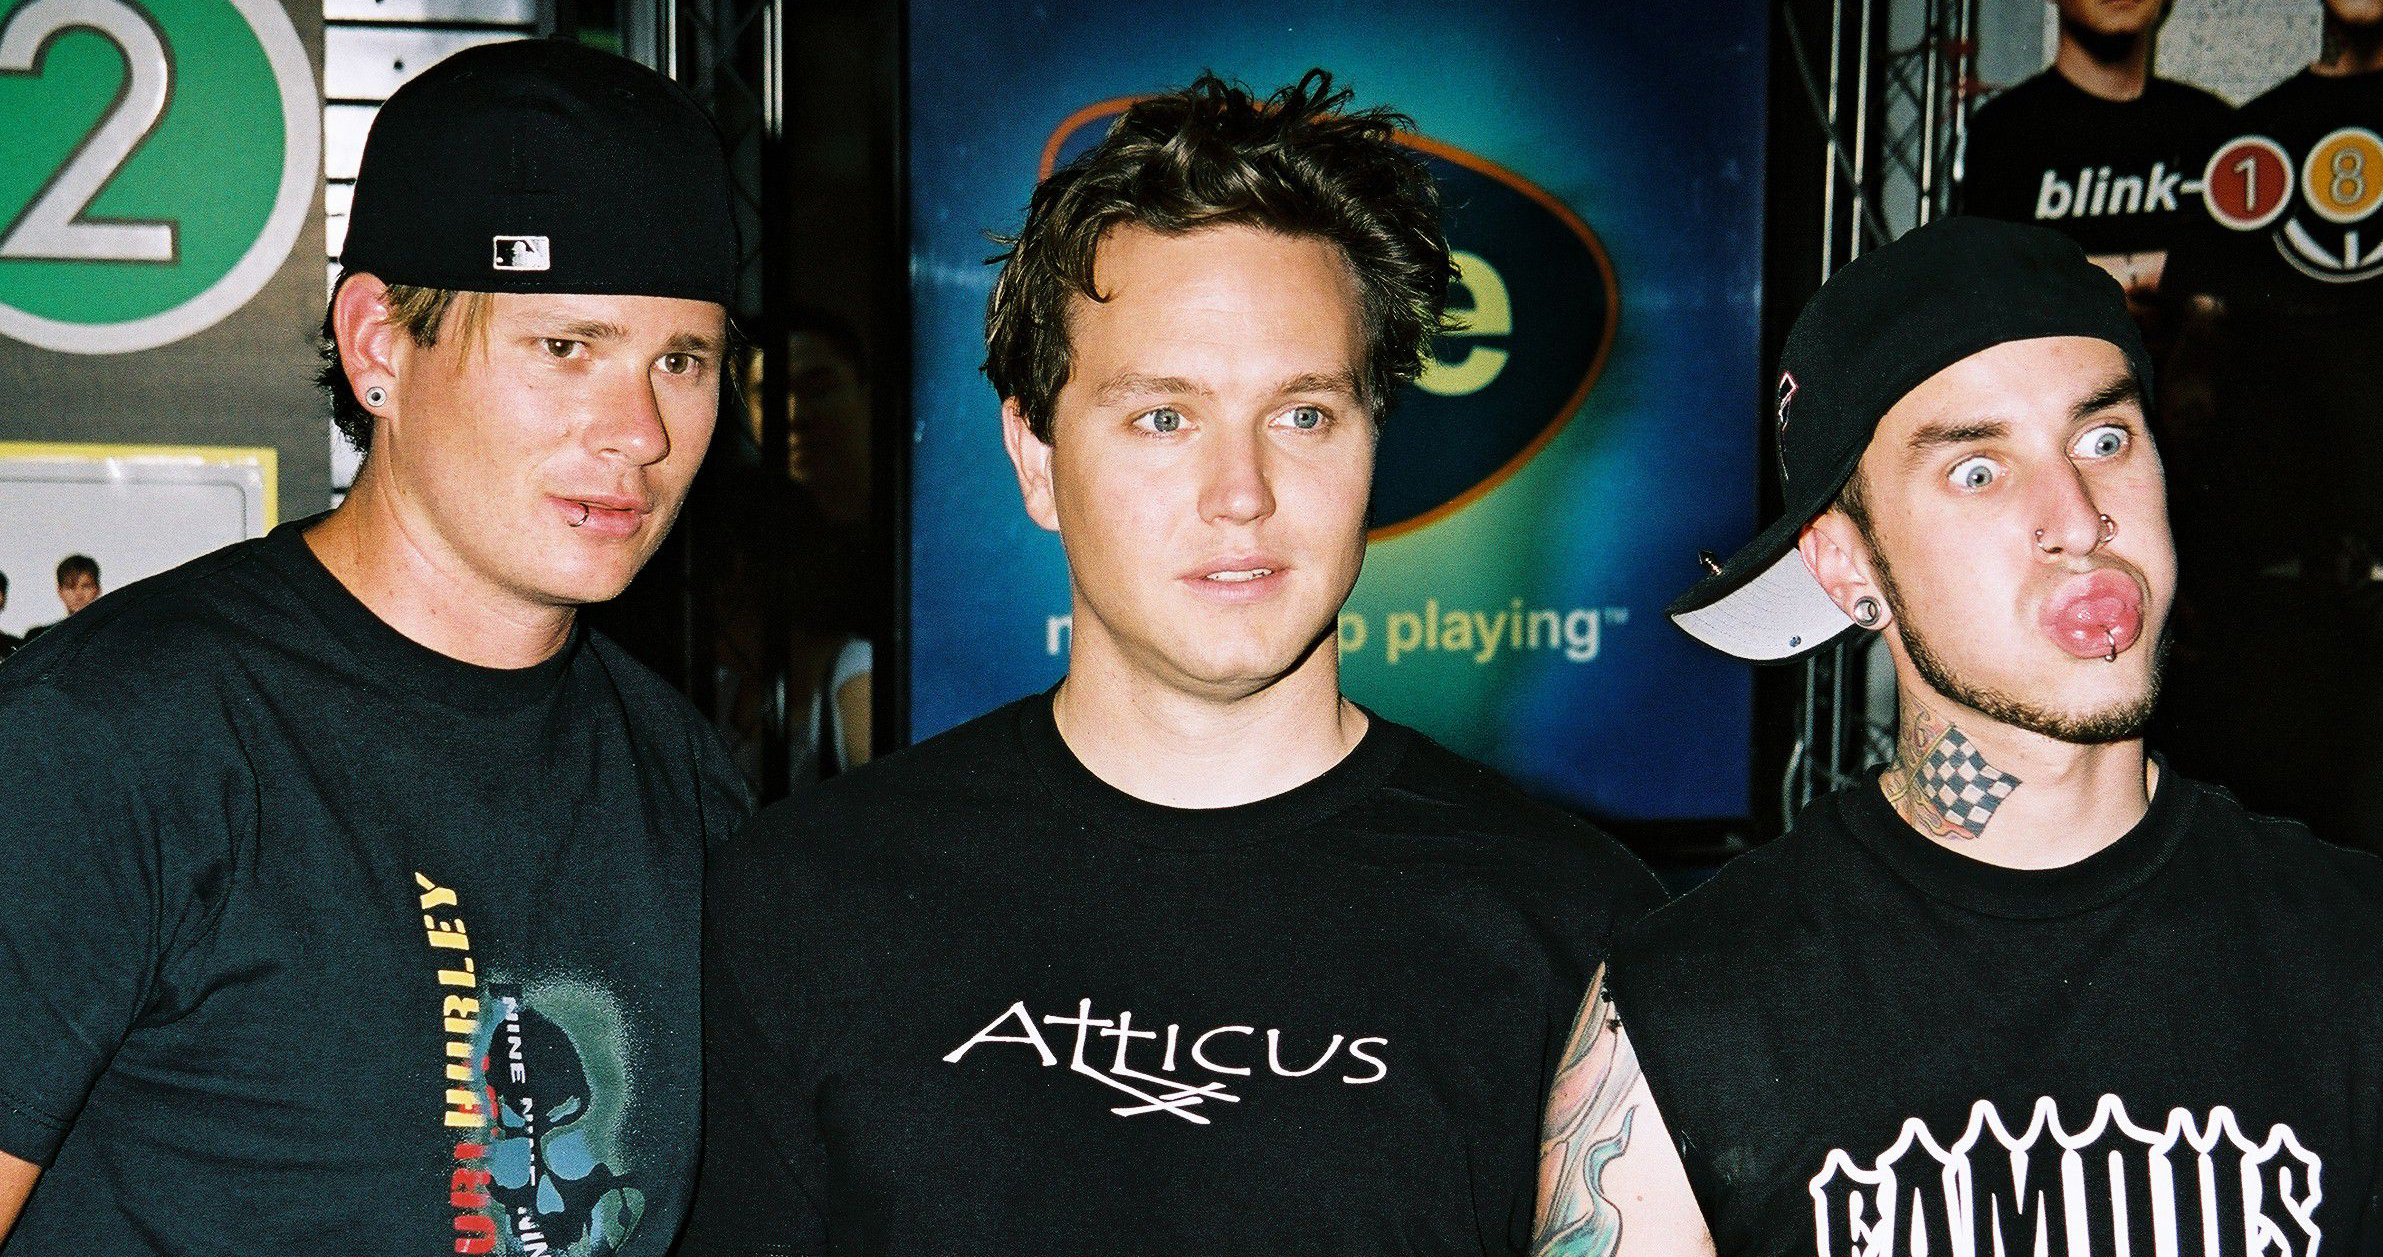 blink-182 are BACK: Everything you need to know